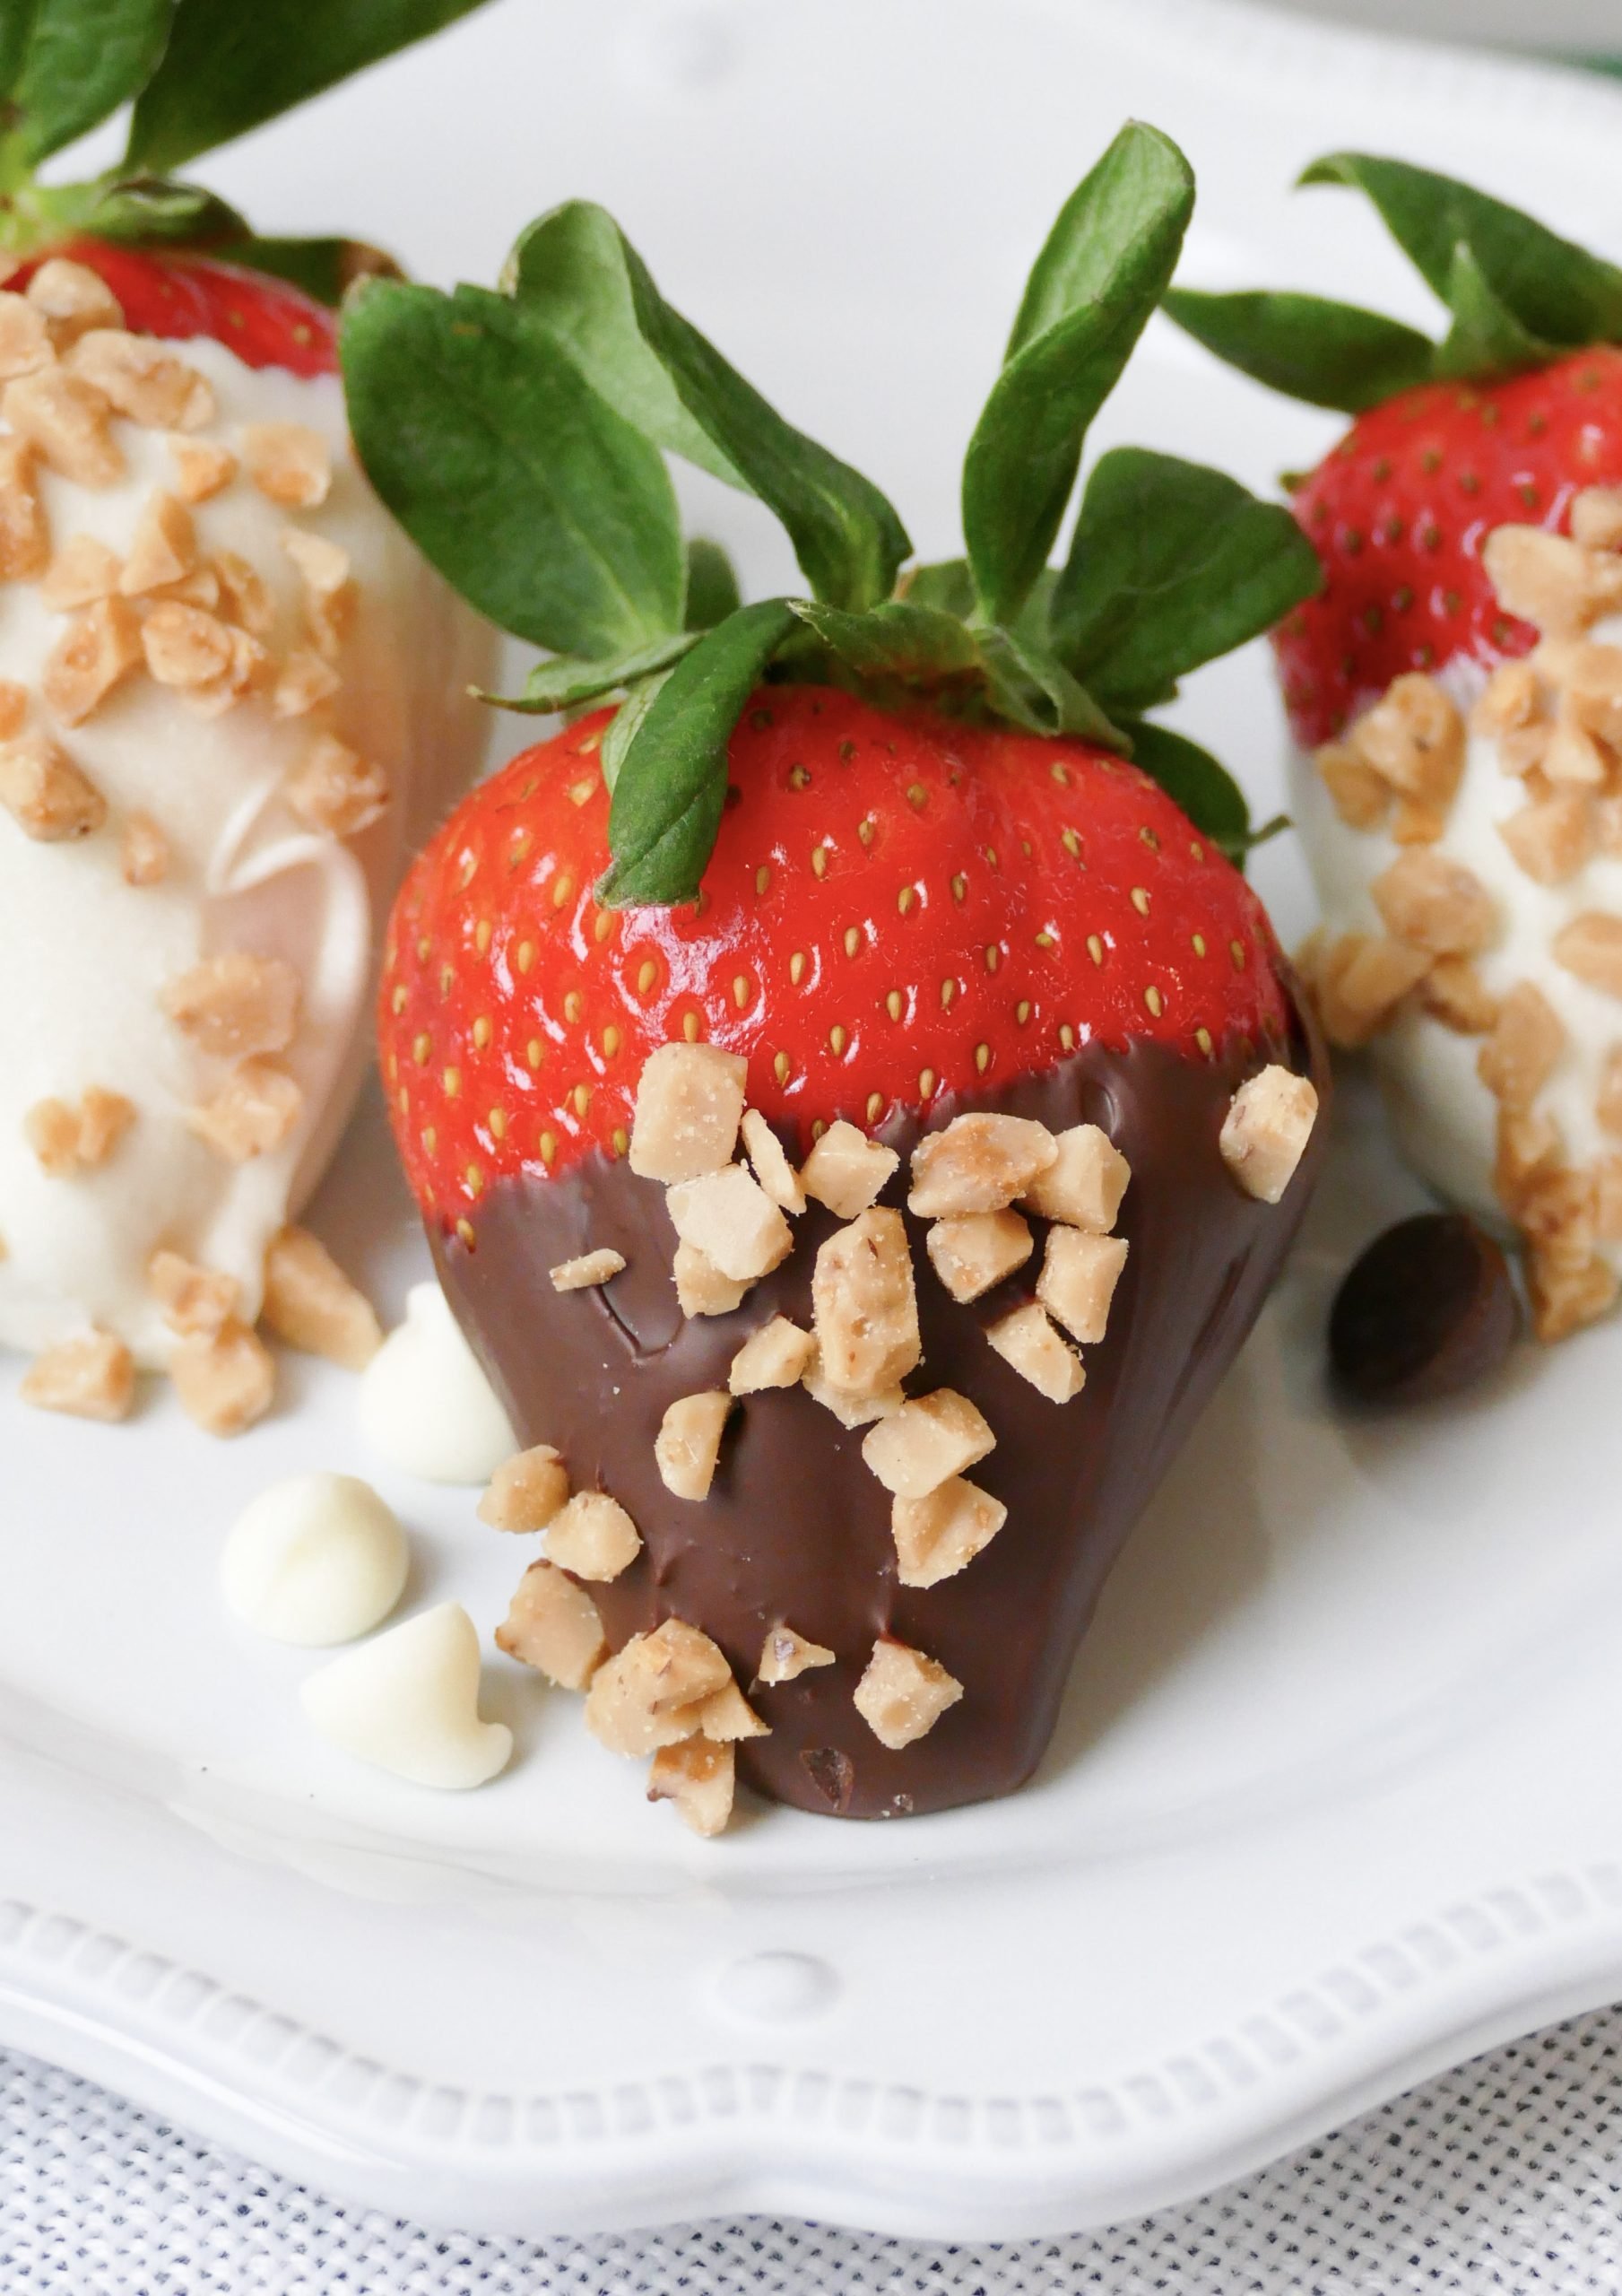 Toffee & Chocolate Covered Strawberries